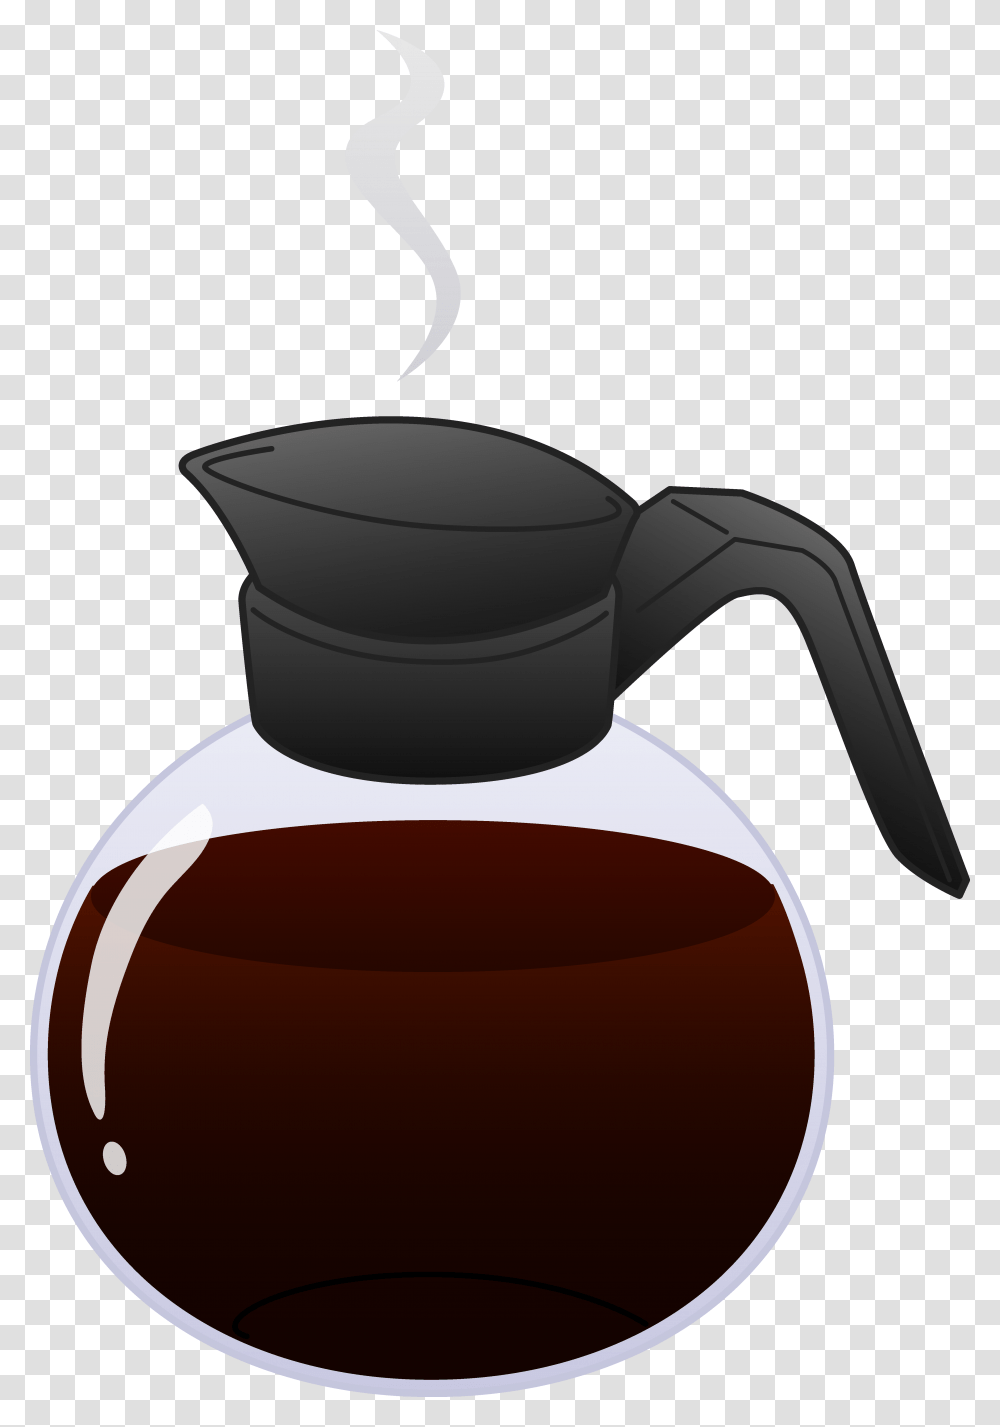 Picture Of Coffee Pot Coffeemaker, Bottle, Pottery, Jar, Ink Bottle Transparent Png